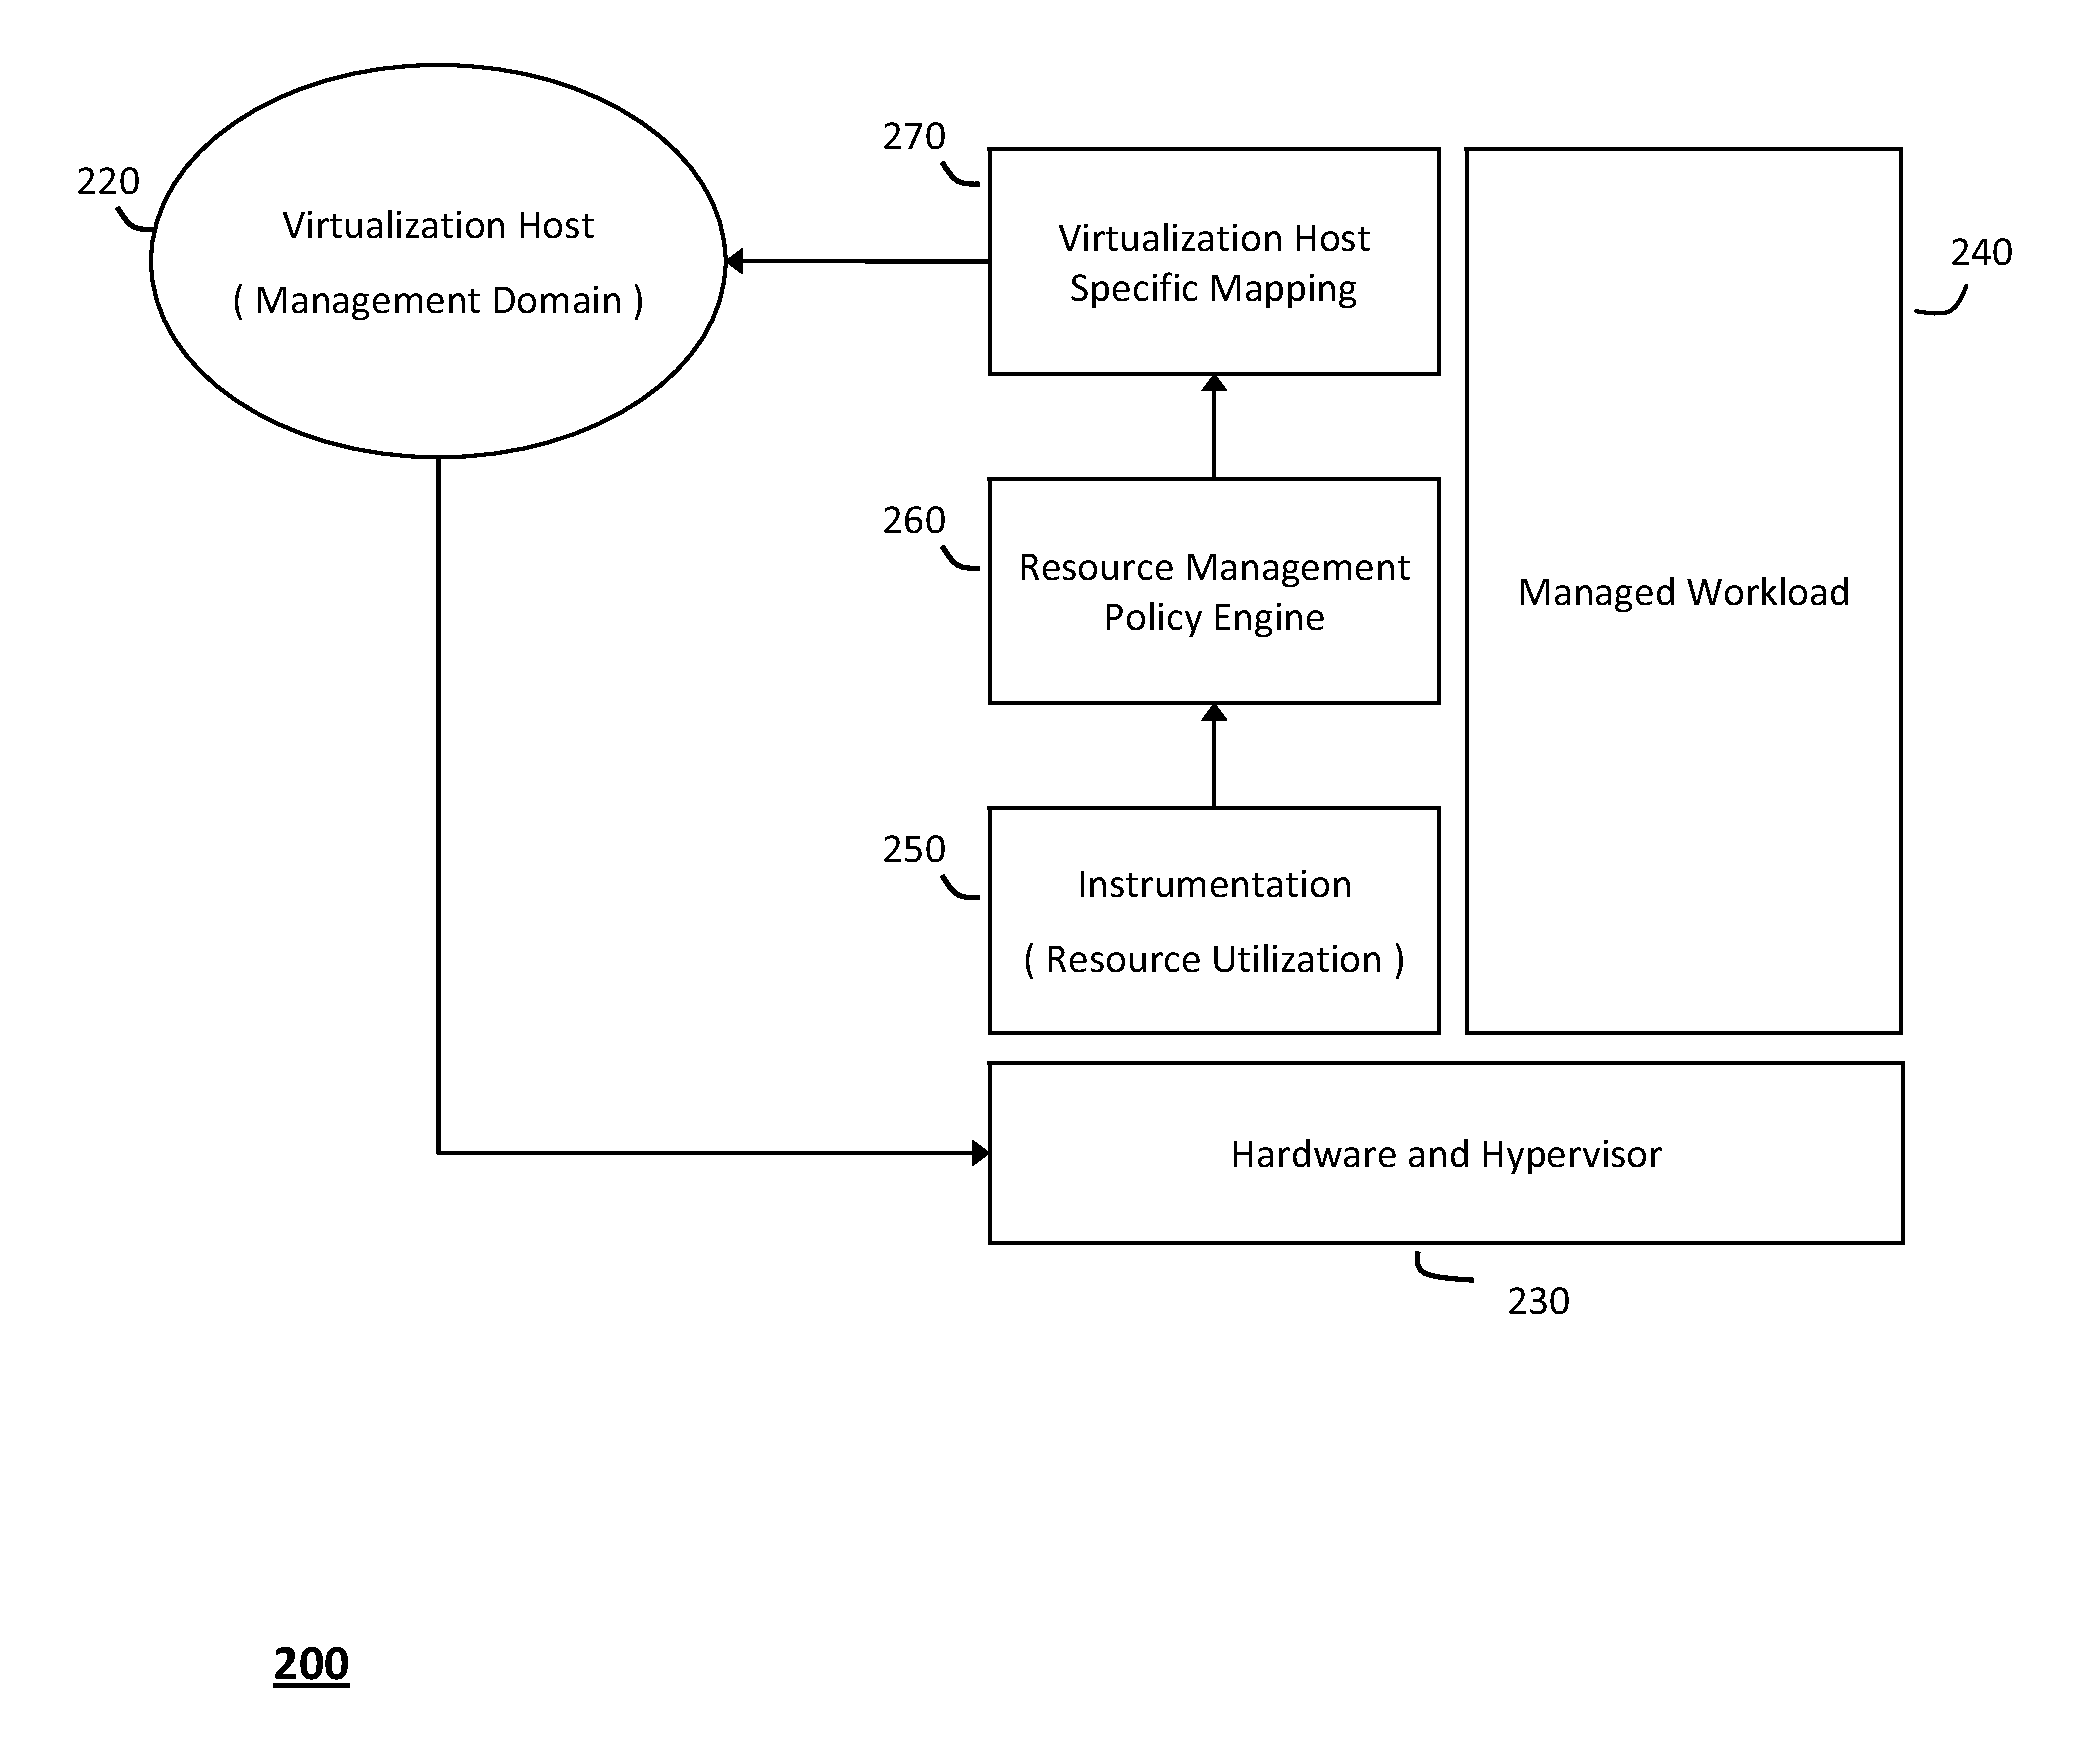 System and method for structuring self-provisioning workloads deployed in virtualized data centers